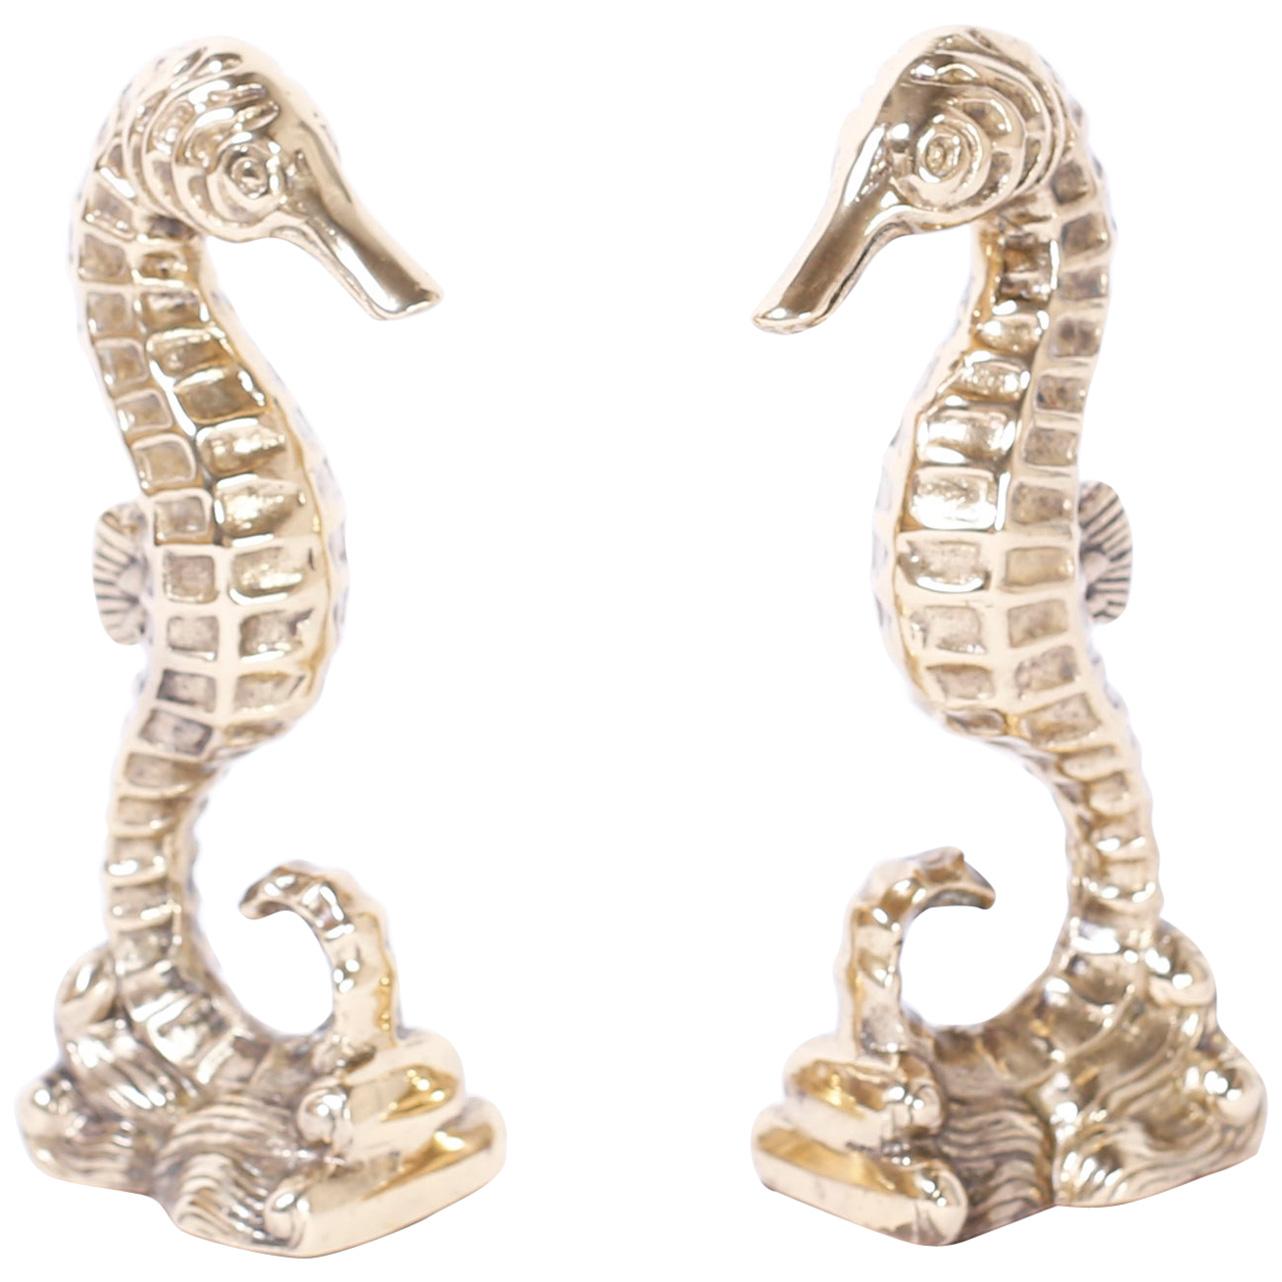 Pair of Vintage Brass Seahorse Bookends